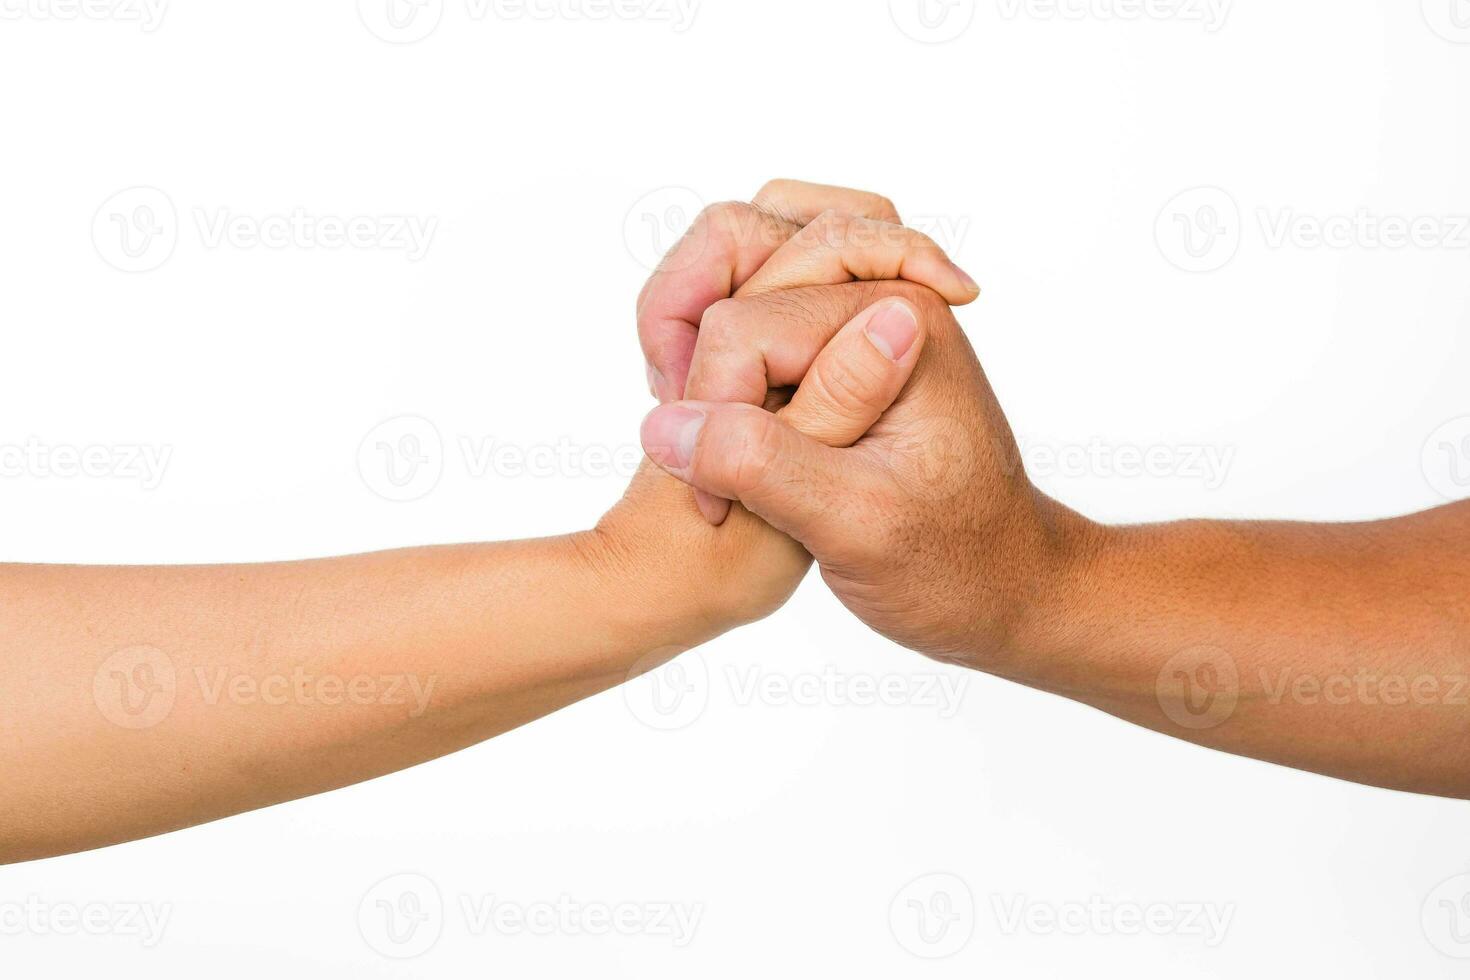 Male and female hands shaking hands. Couple holding hands on white background. That can mean helping, caring, protecting, loving, caring and world peace concept. photo